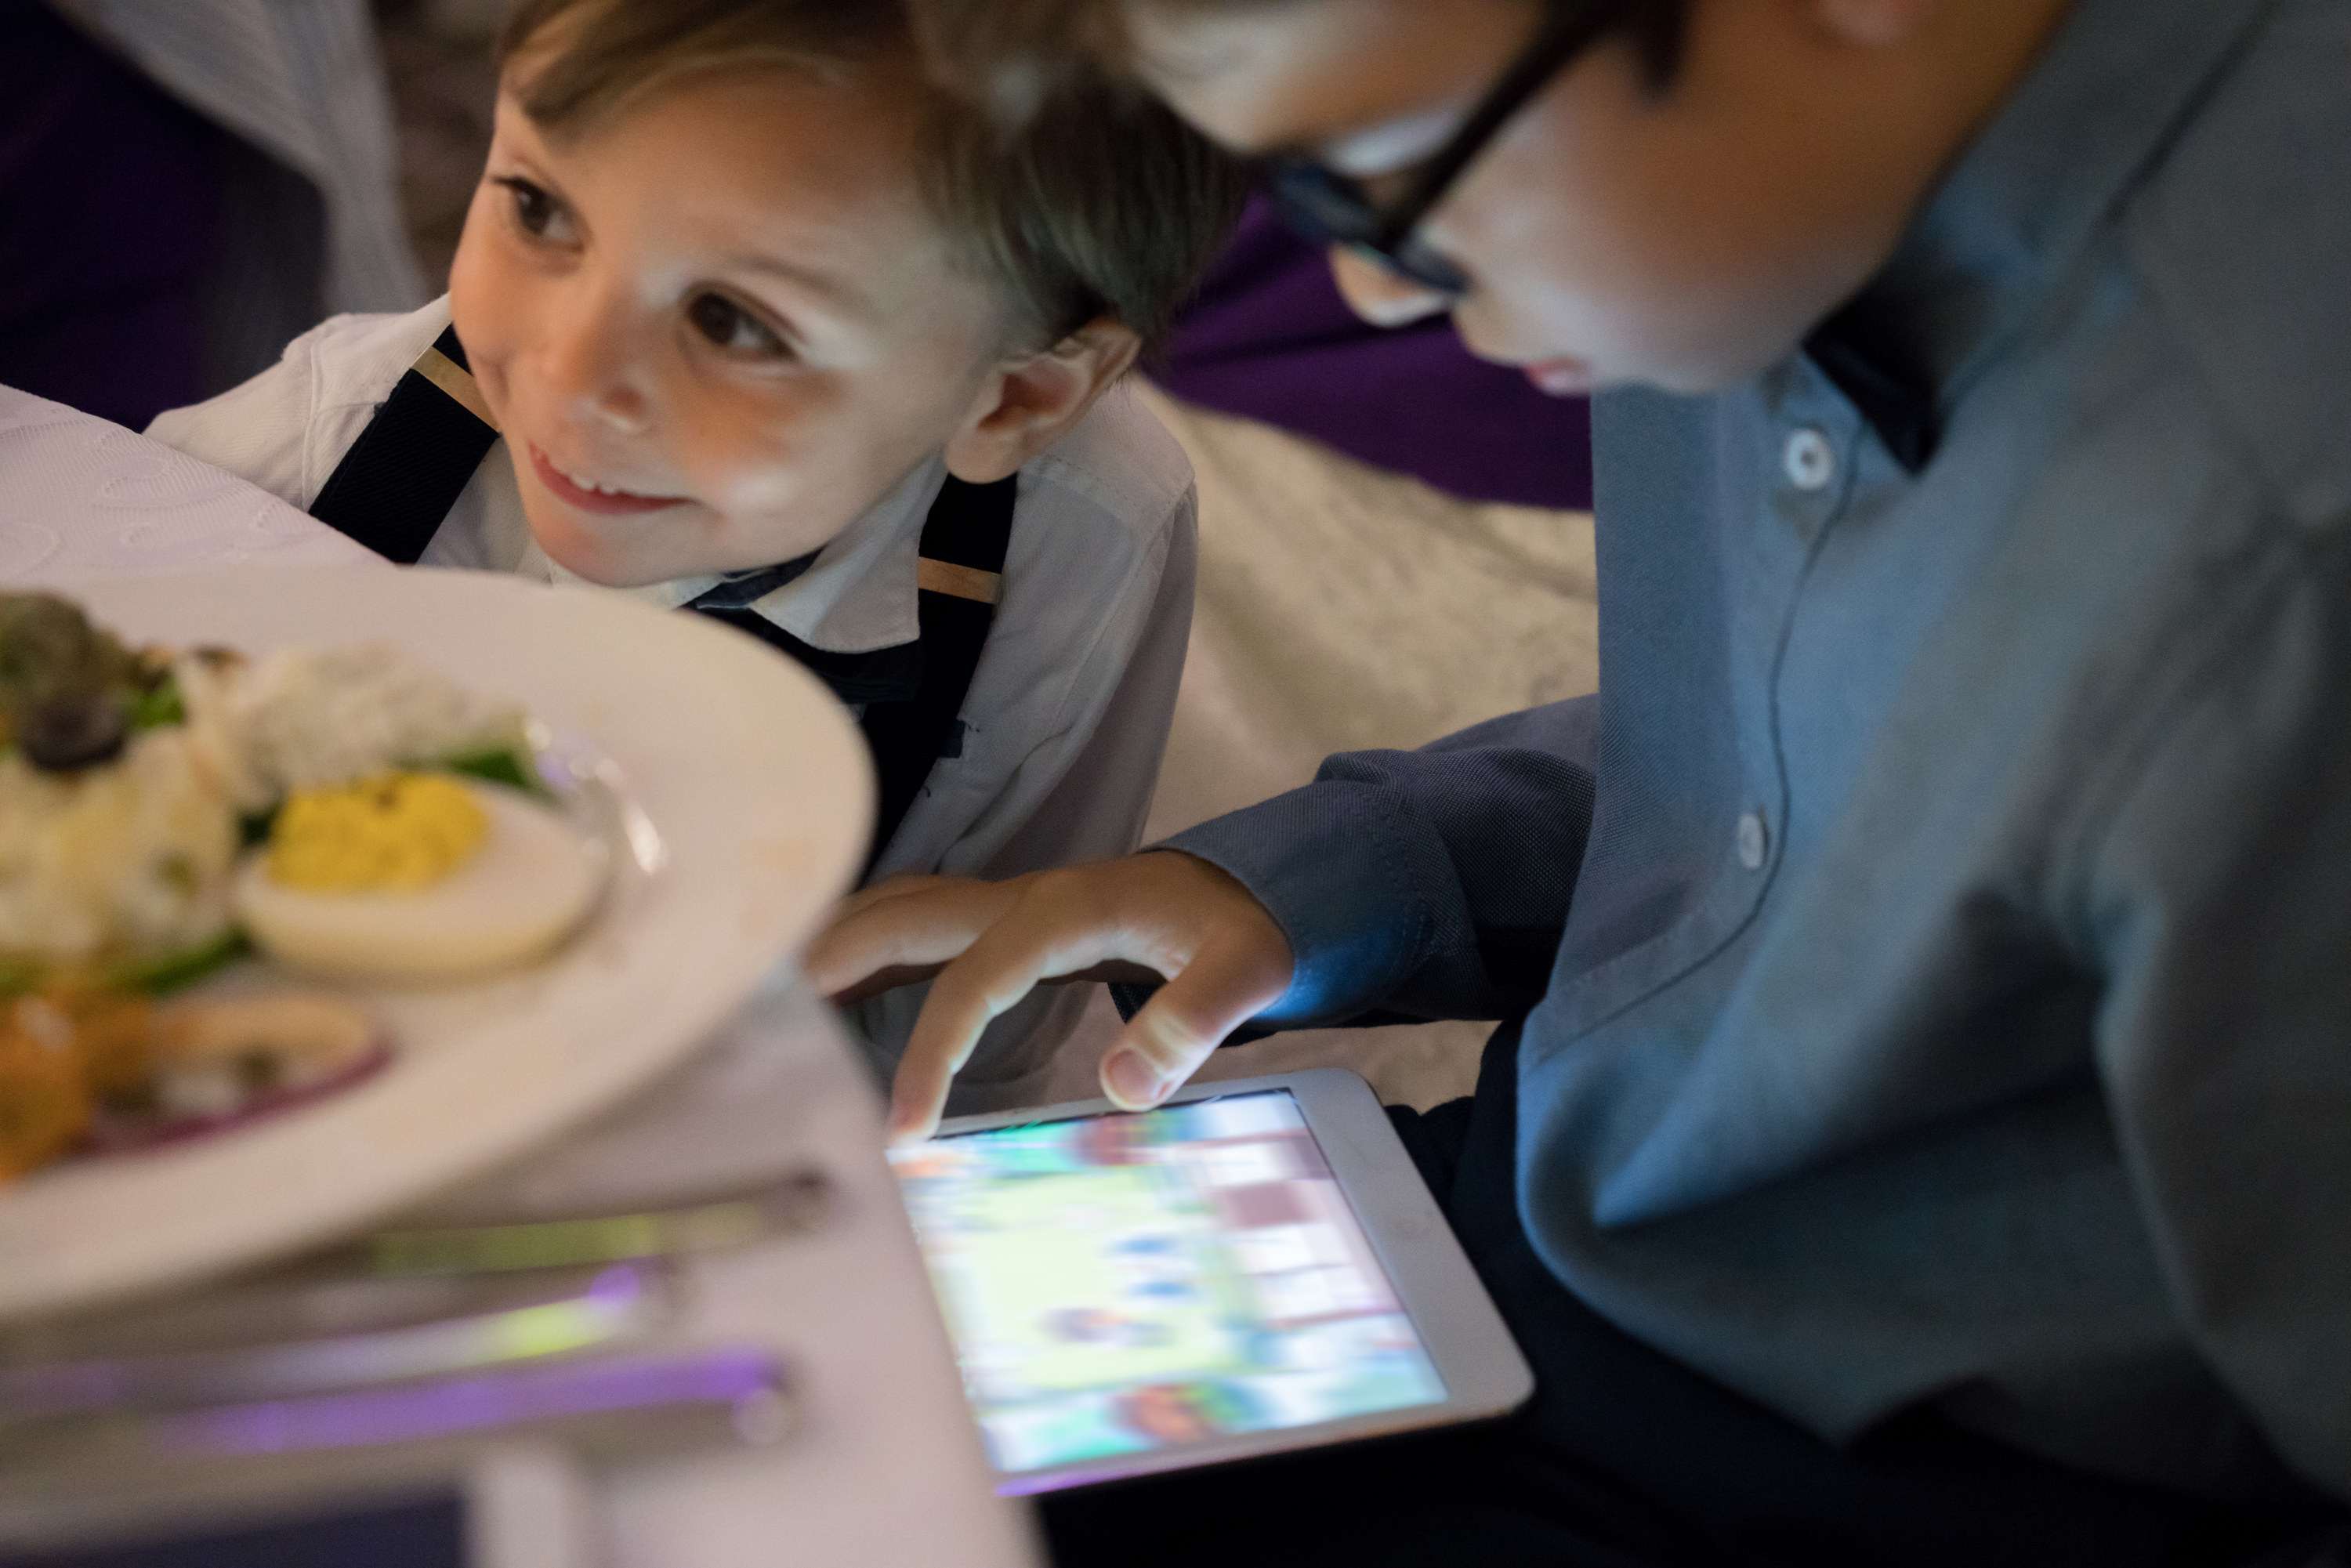 toddler and grade-school aged child dressed in button downs playing with a tablet at a restaurant with a plate of food in front of them